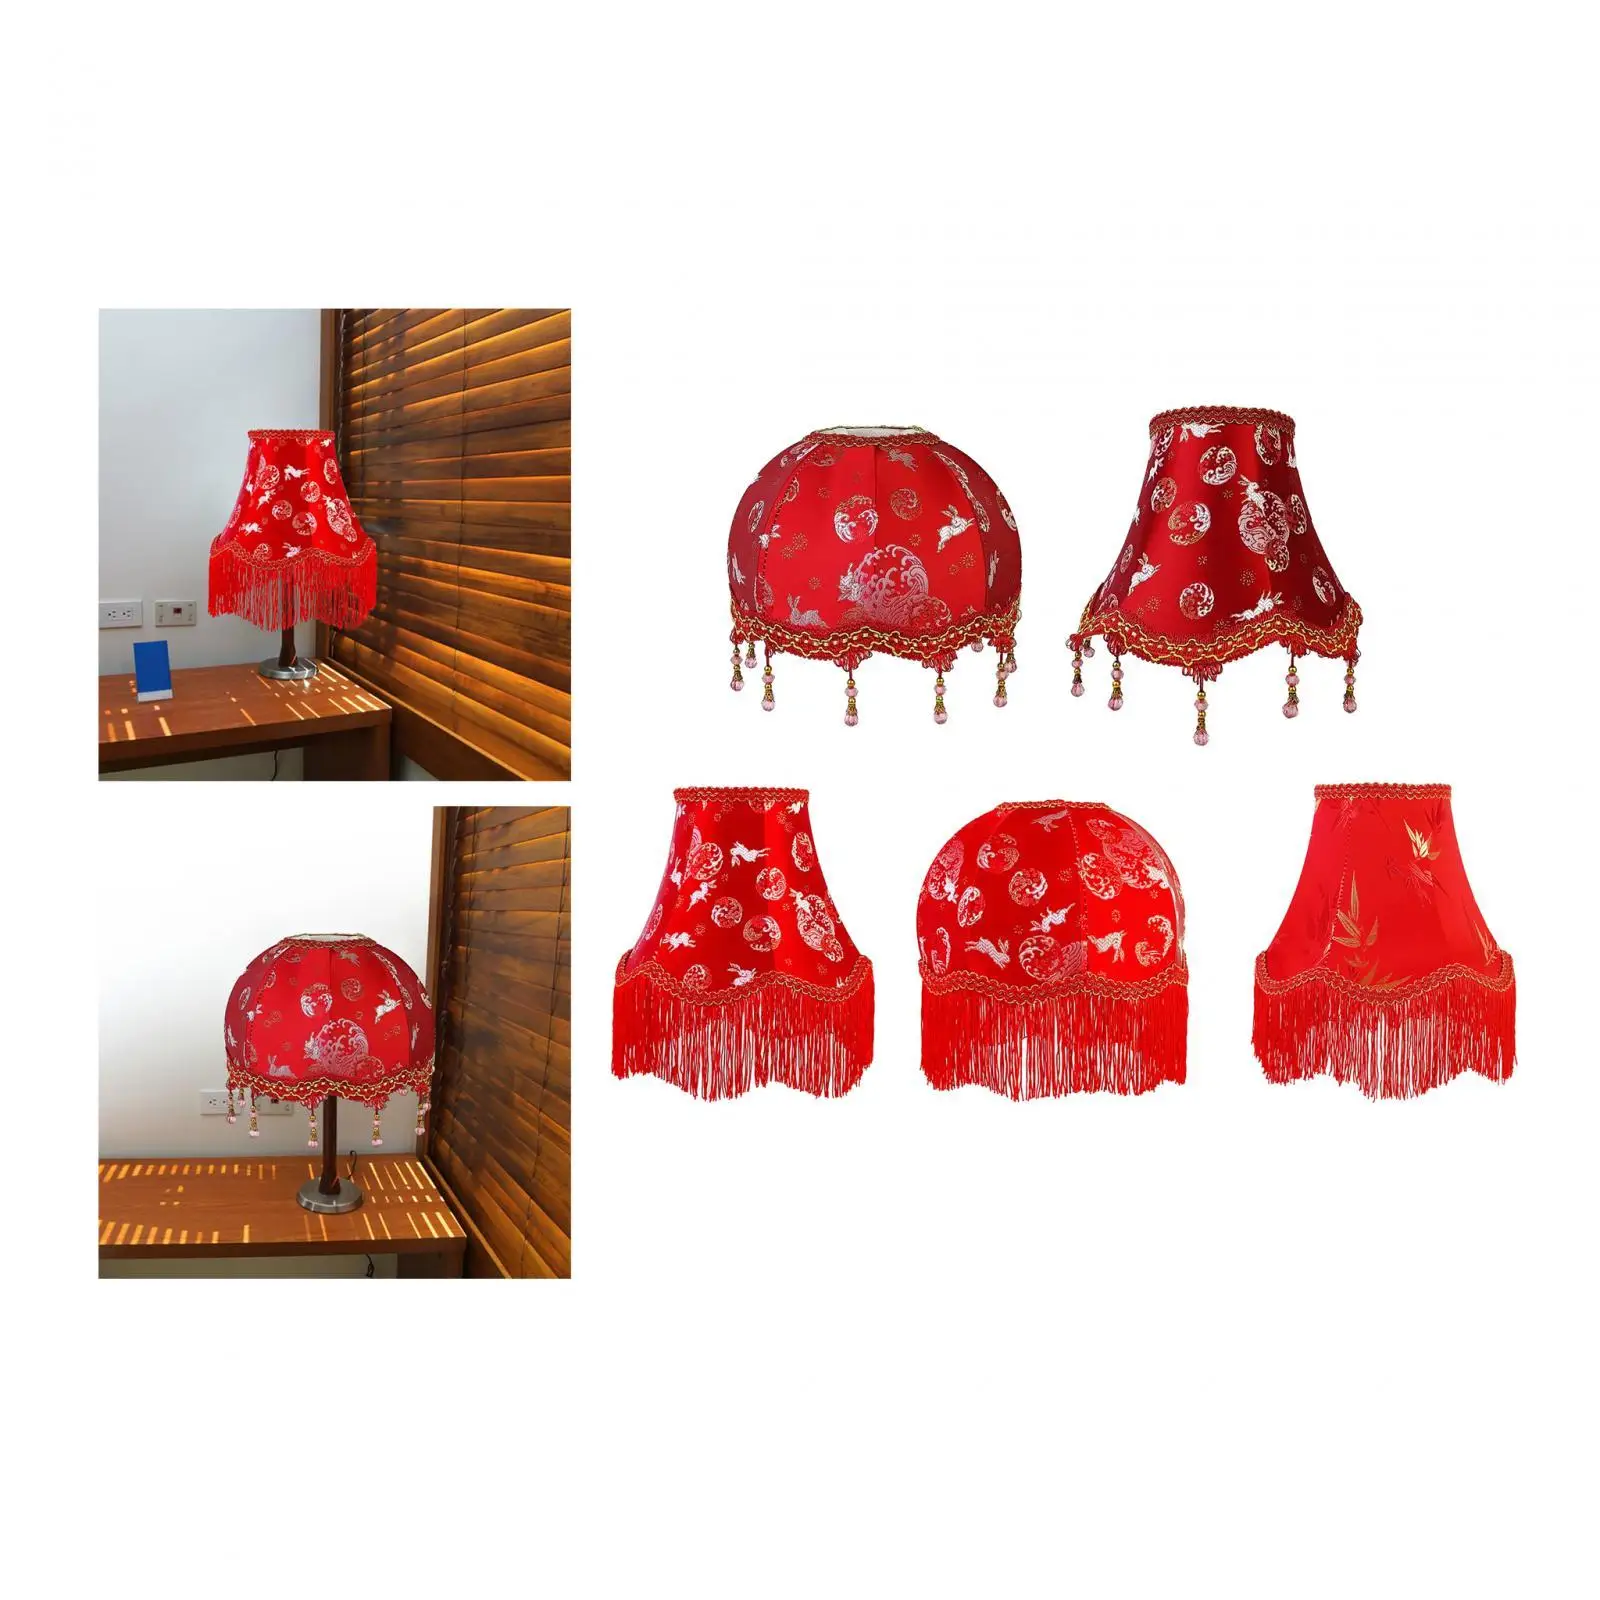 Floor Light Cover Tassel Fabric Tabletop Lamp Shade for Apartment Hotel Cafe